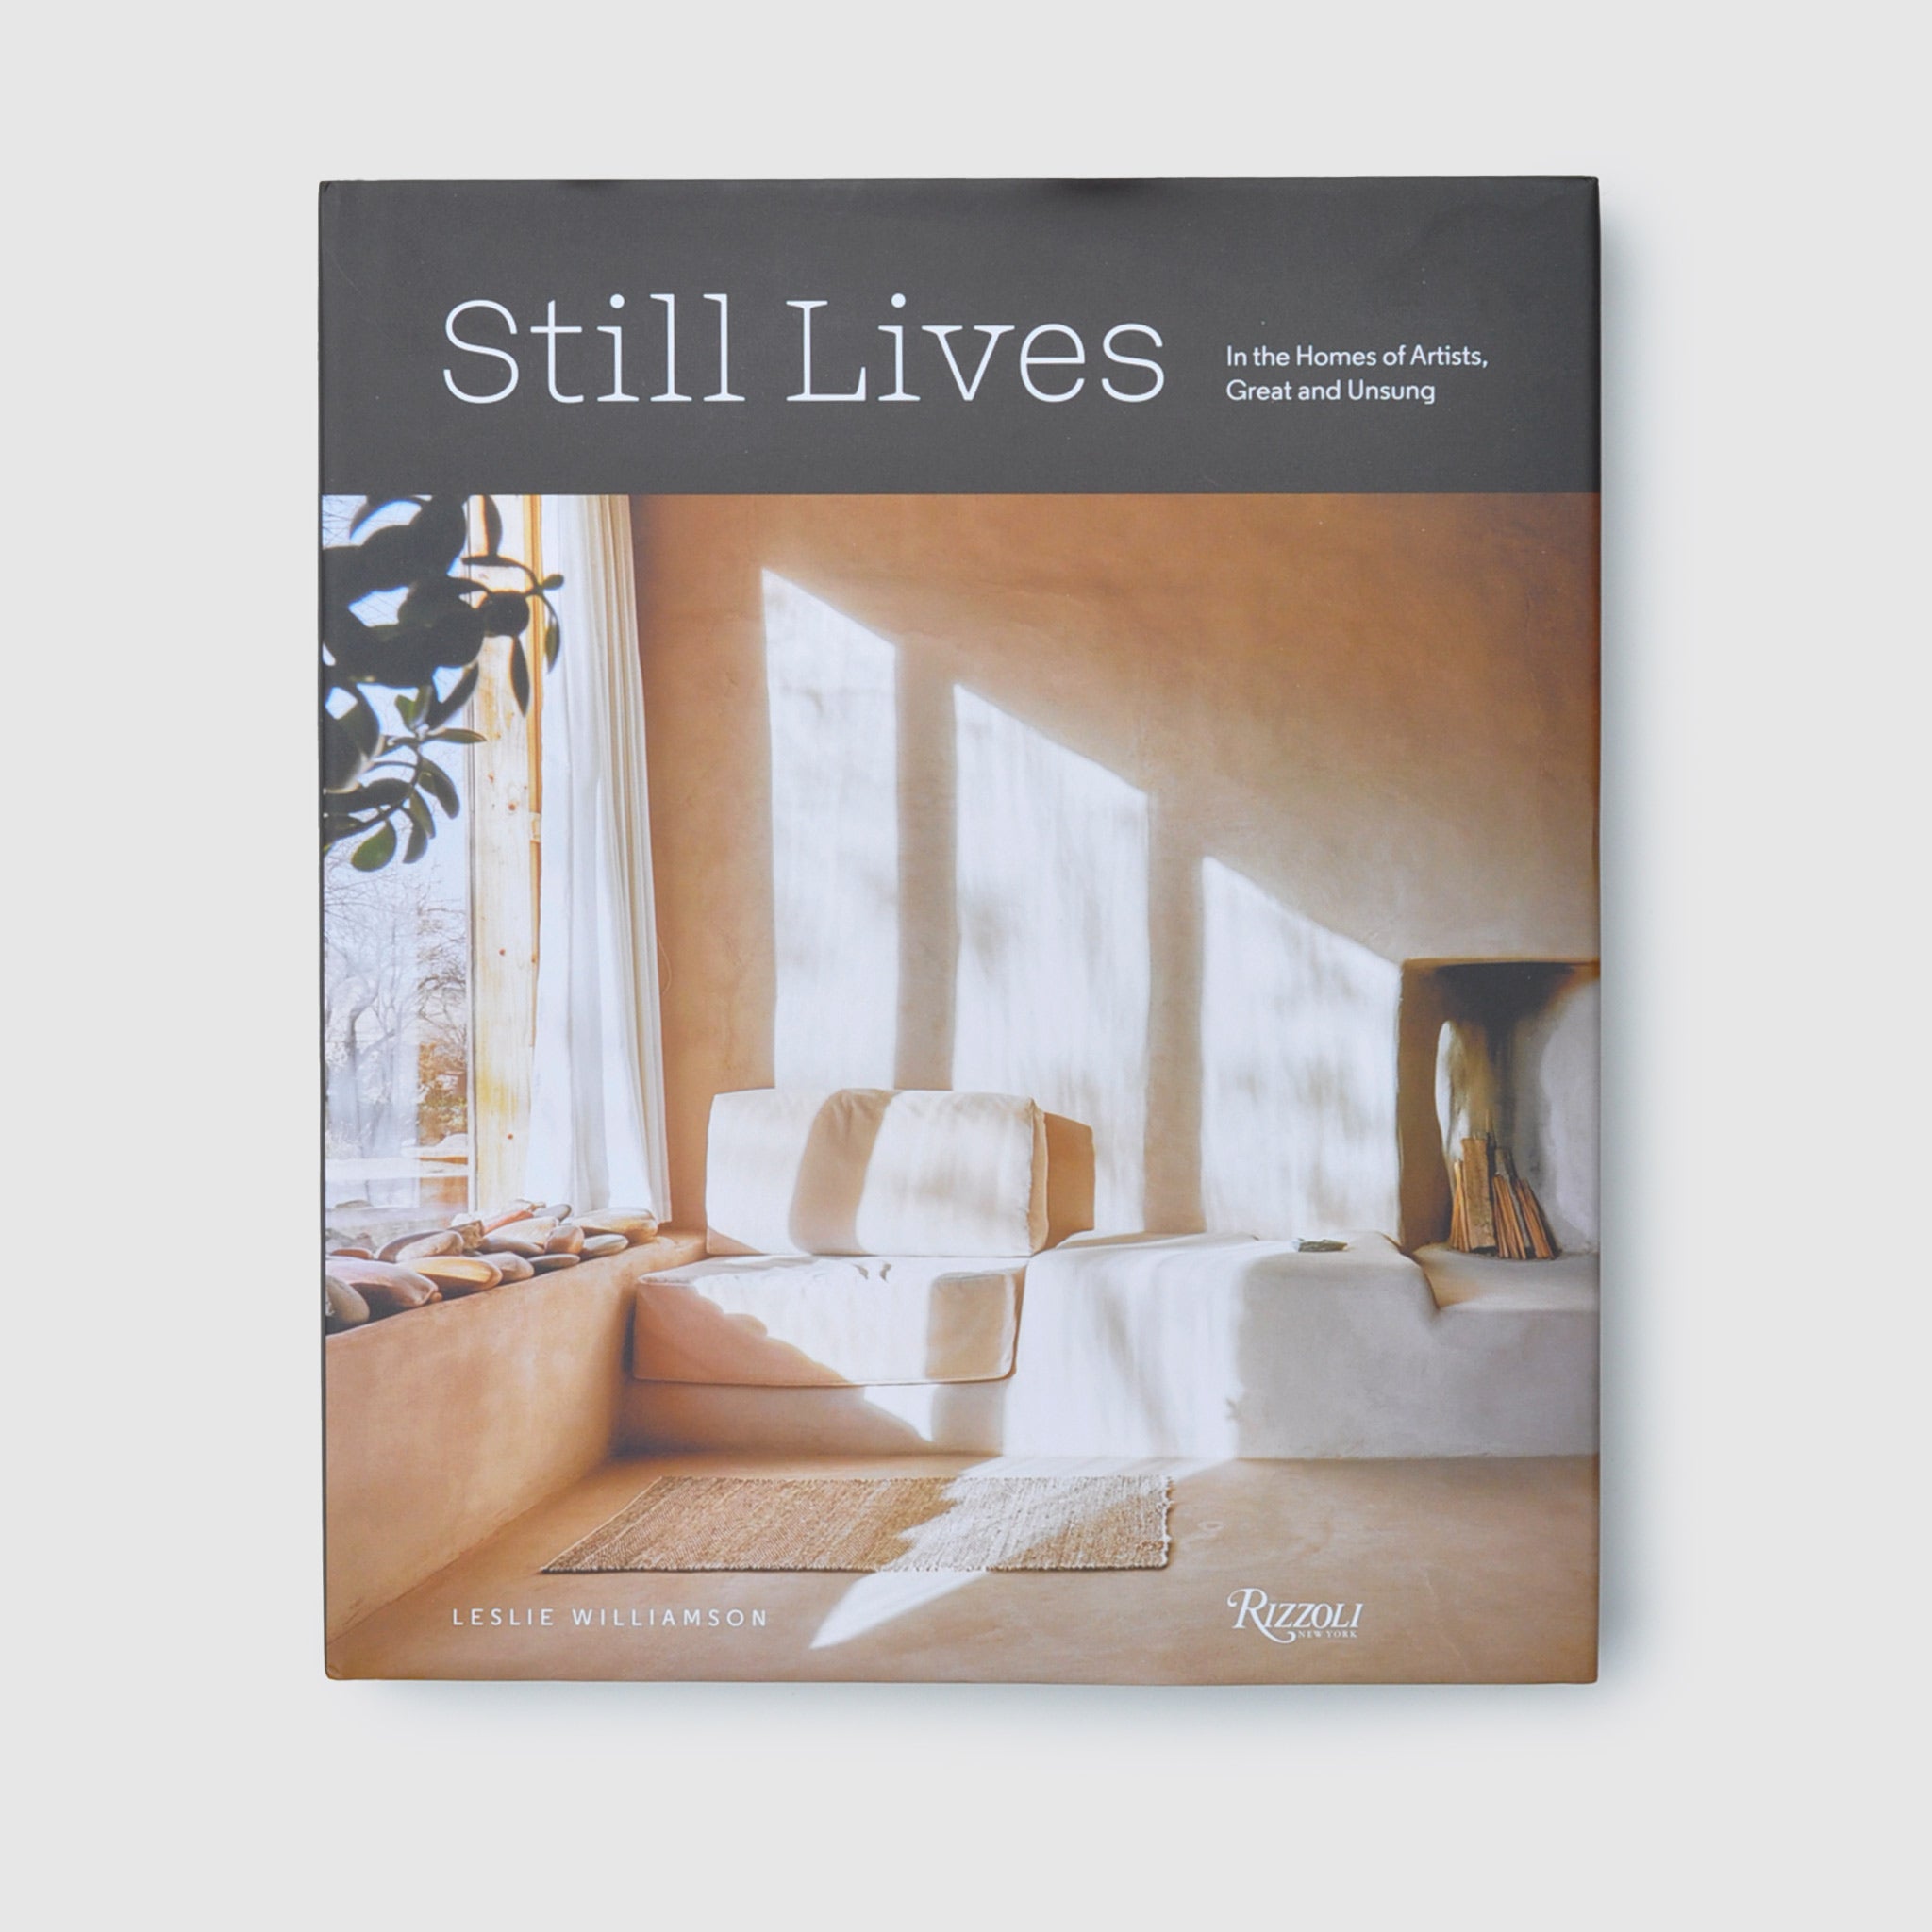 Photo displays the Still Lives by Leslie Williamson cover